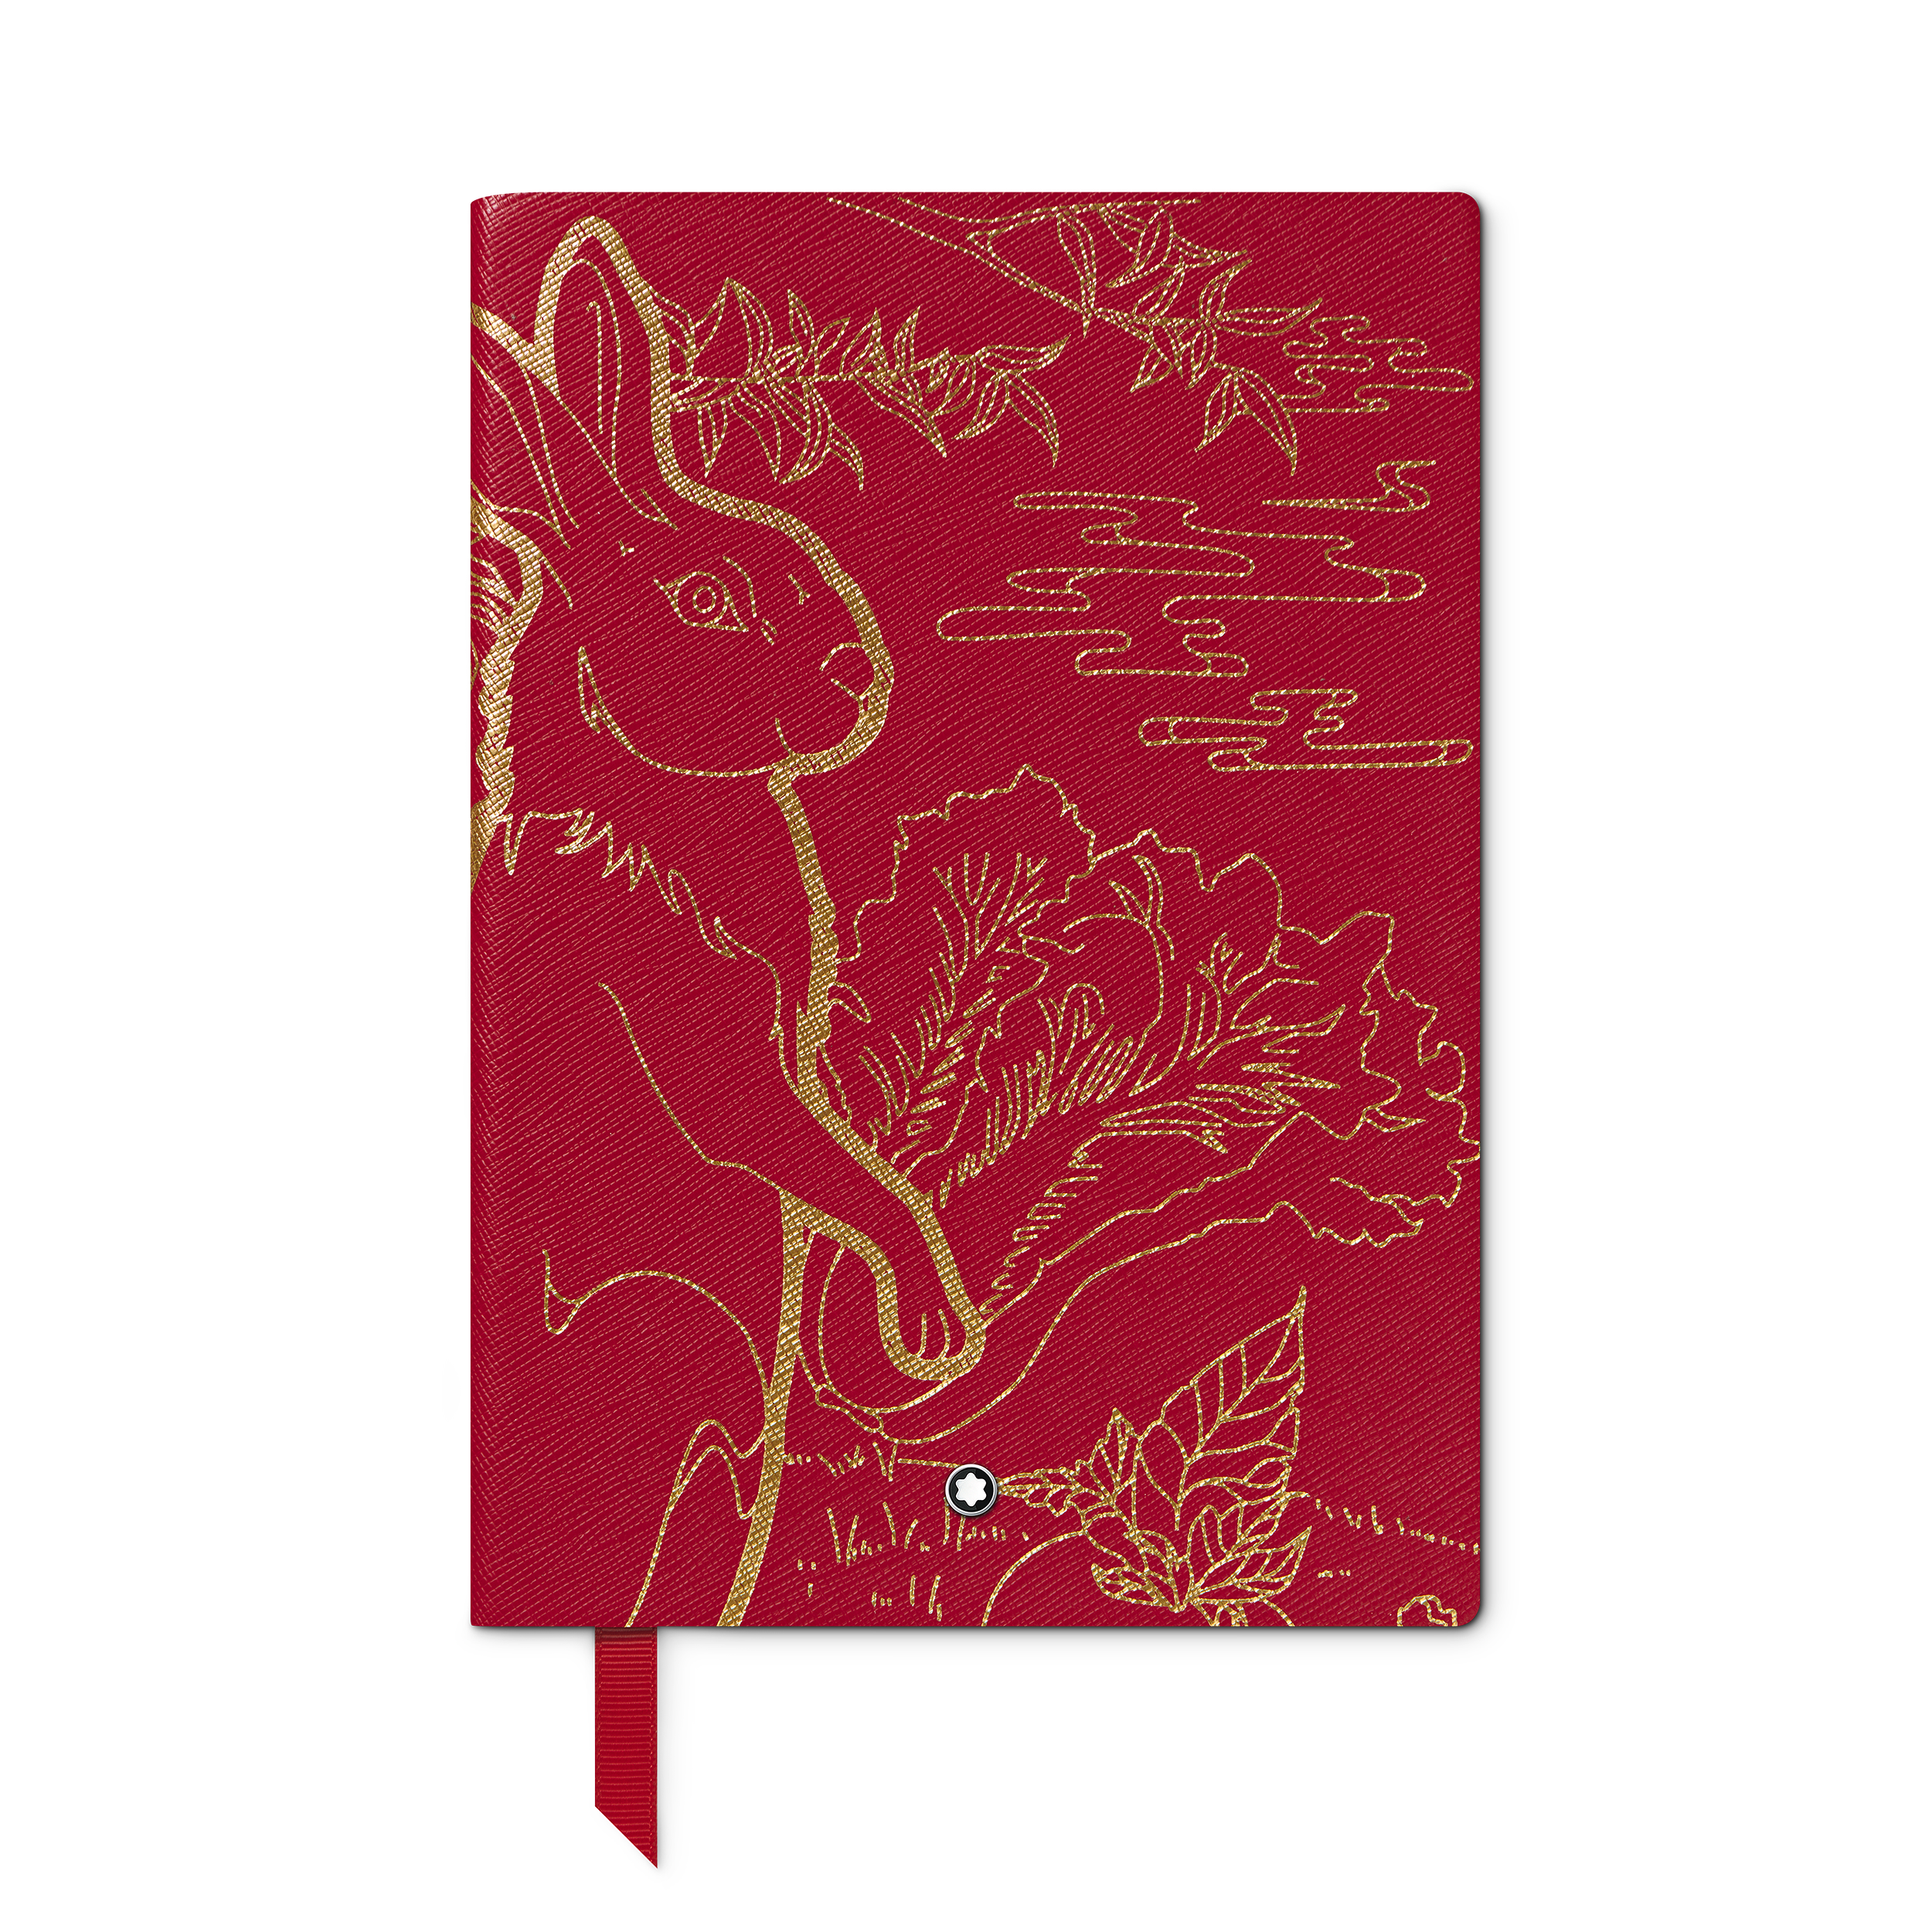 Notebook #146 small, The legend of Zodiac, Rabbit, red lined